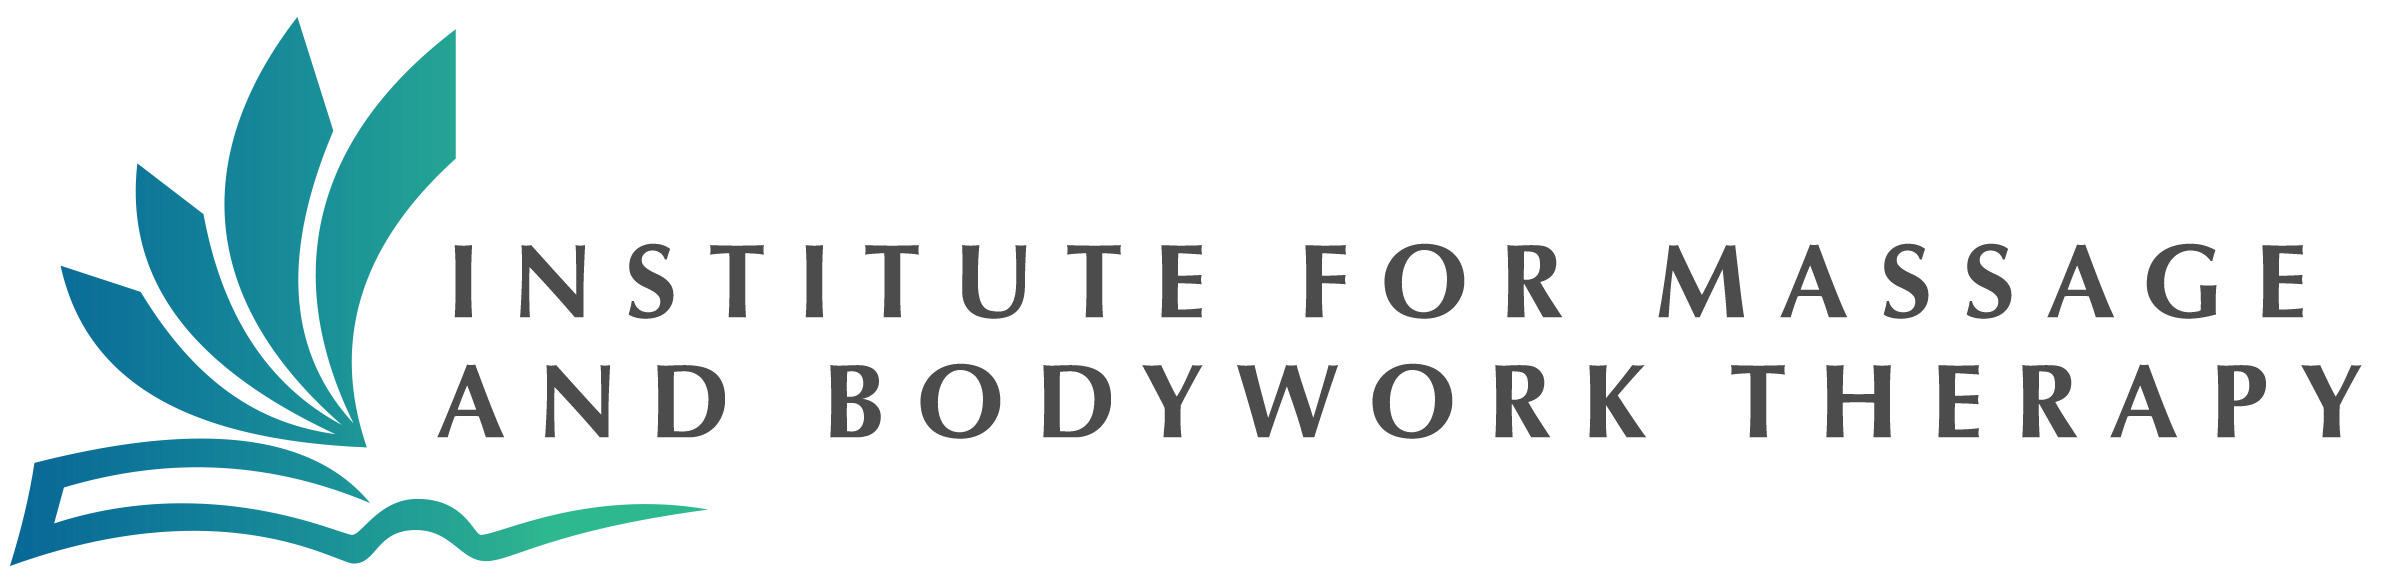 Institute For Massage And BodyWork Therapy